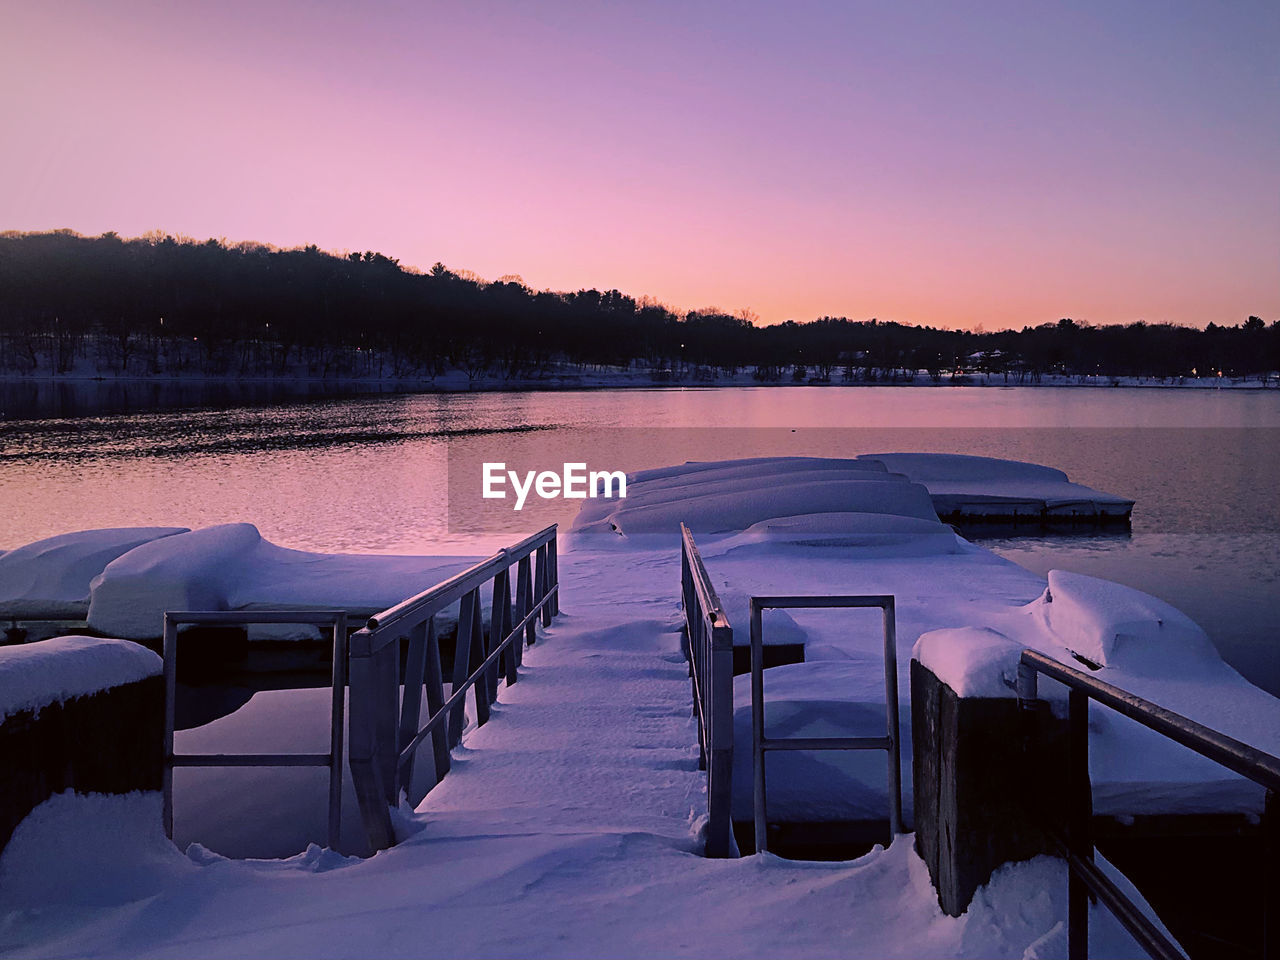 SCENIC VIEW OF FROZEN LAKE AGAINST CLEAR SKY DURING SUNSET